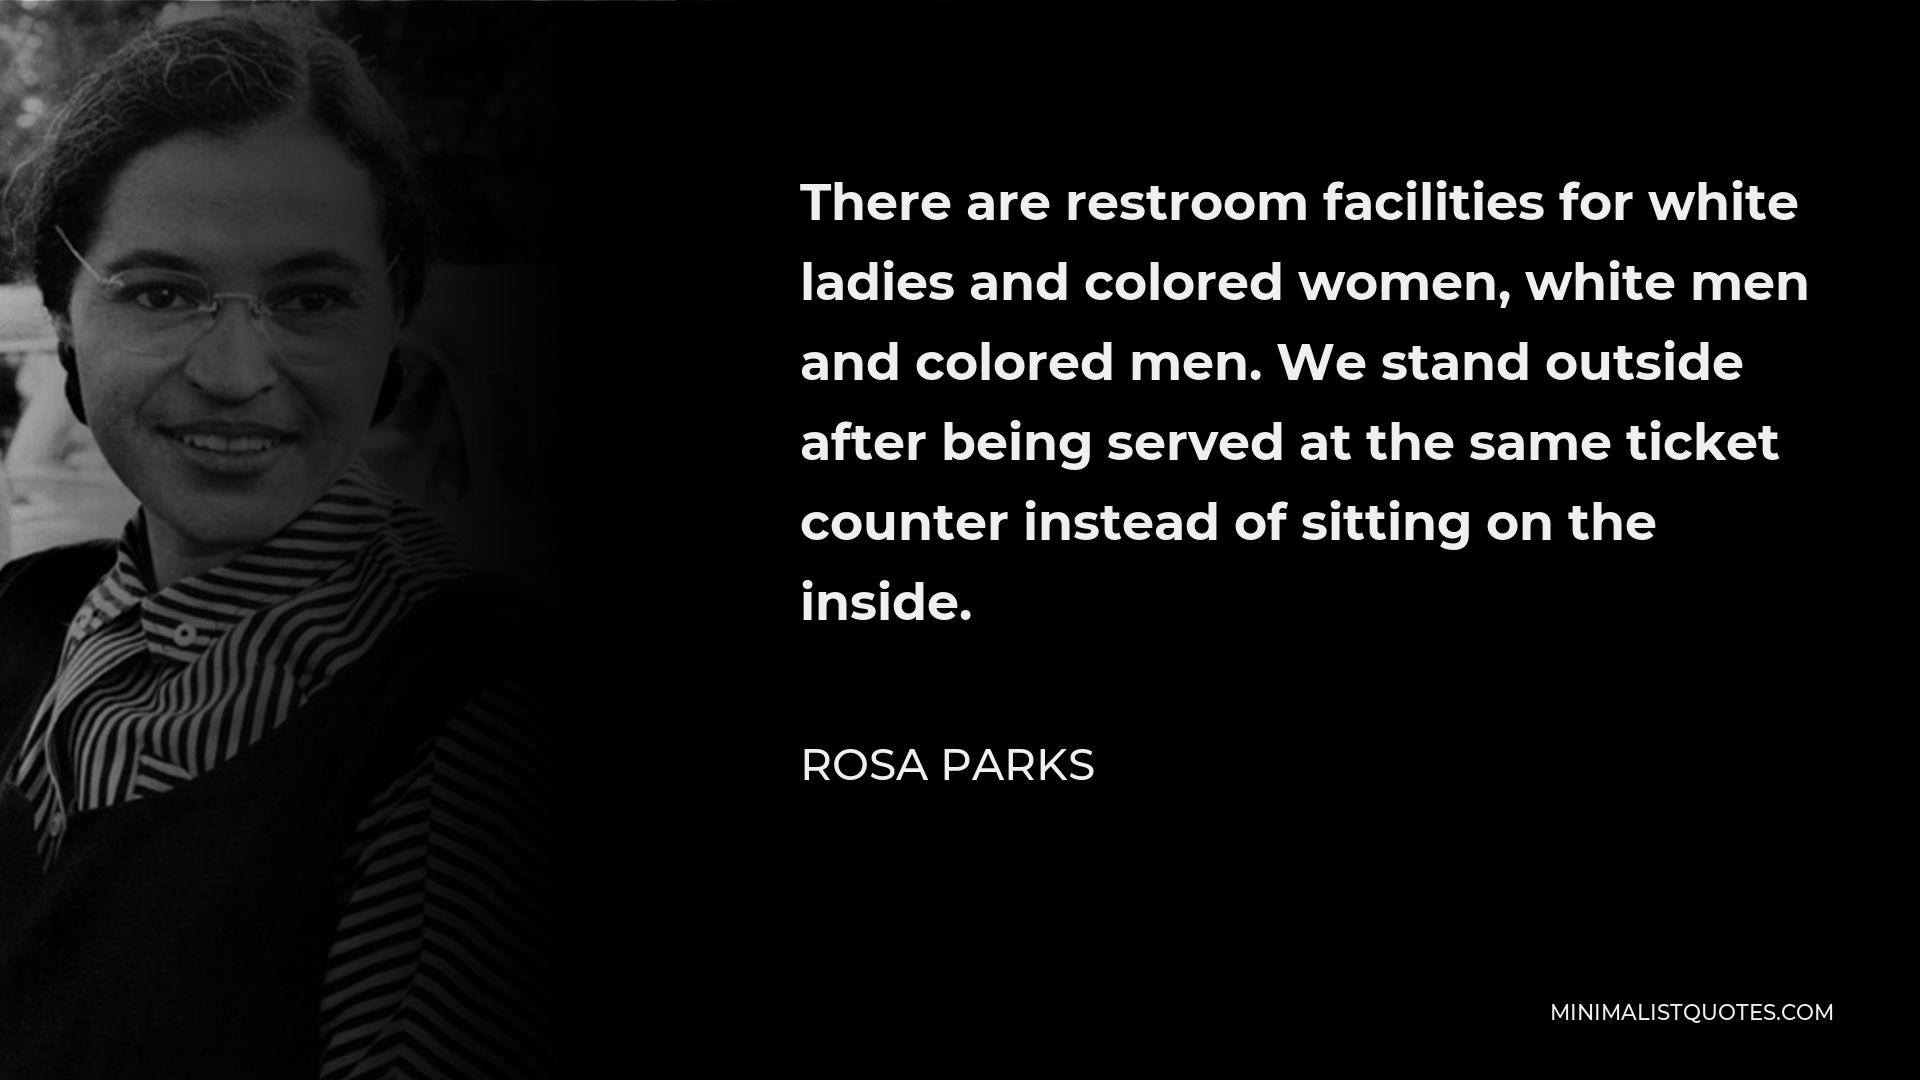 Rosa Parks Quote - There are restroom facilities for white ladies and colored women, white men and colored men. We stand outside after being served at the same ticket counter instead of sitting on the inside.